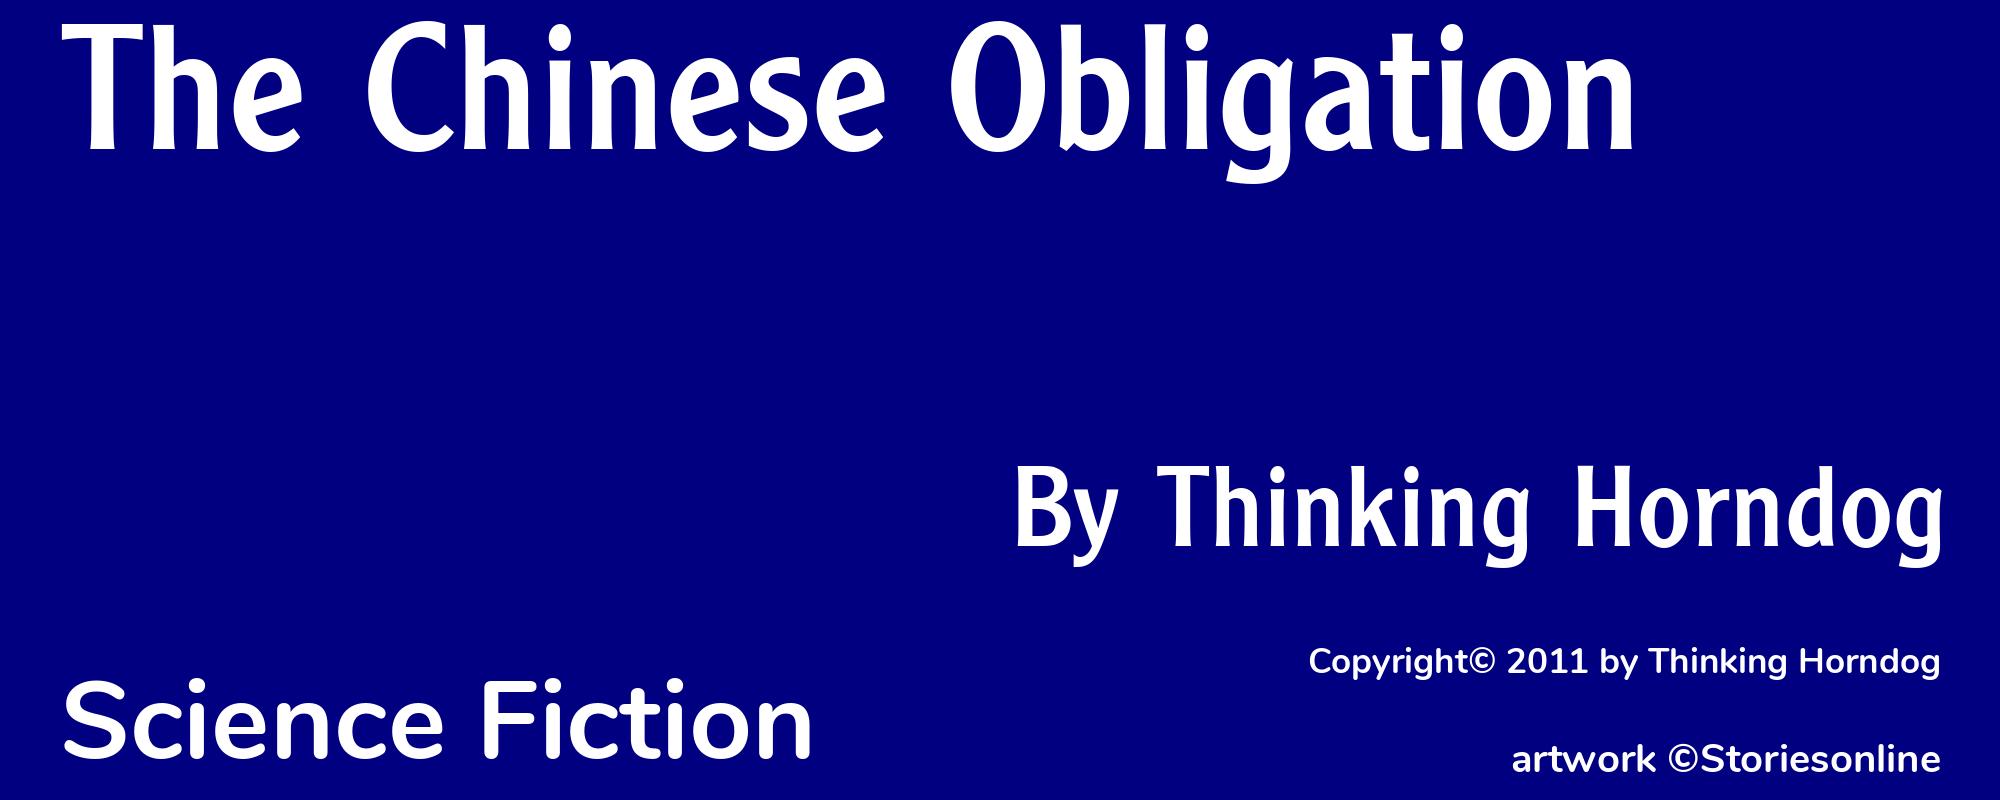 The Chinese Obligation - Cover